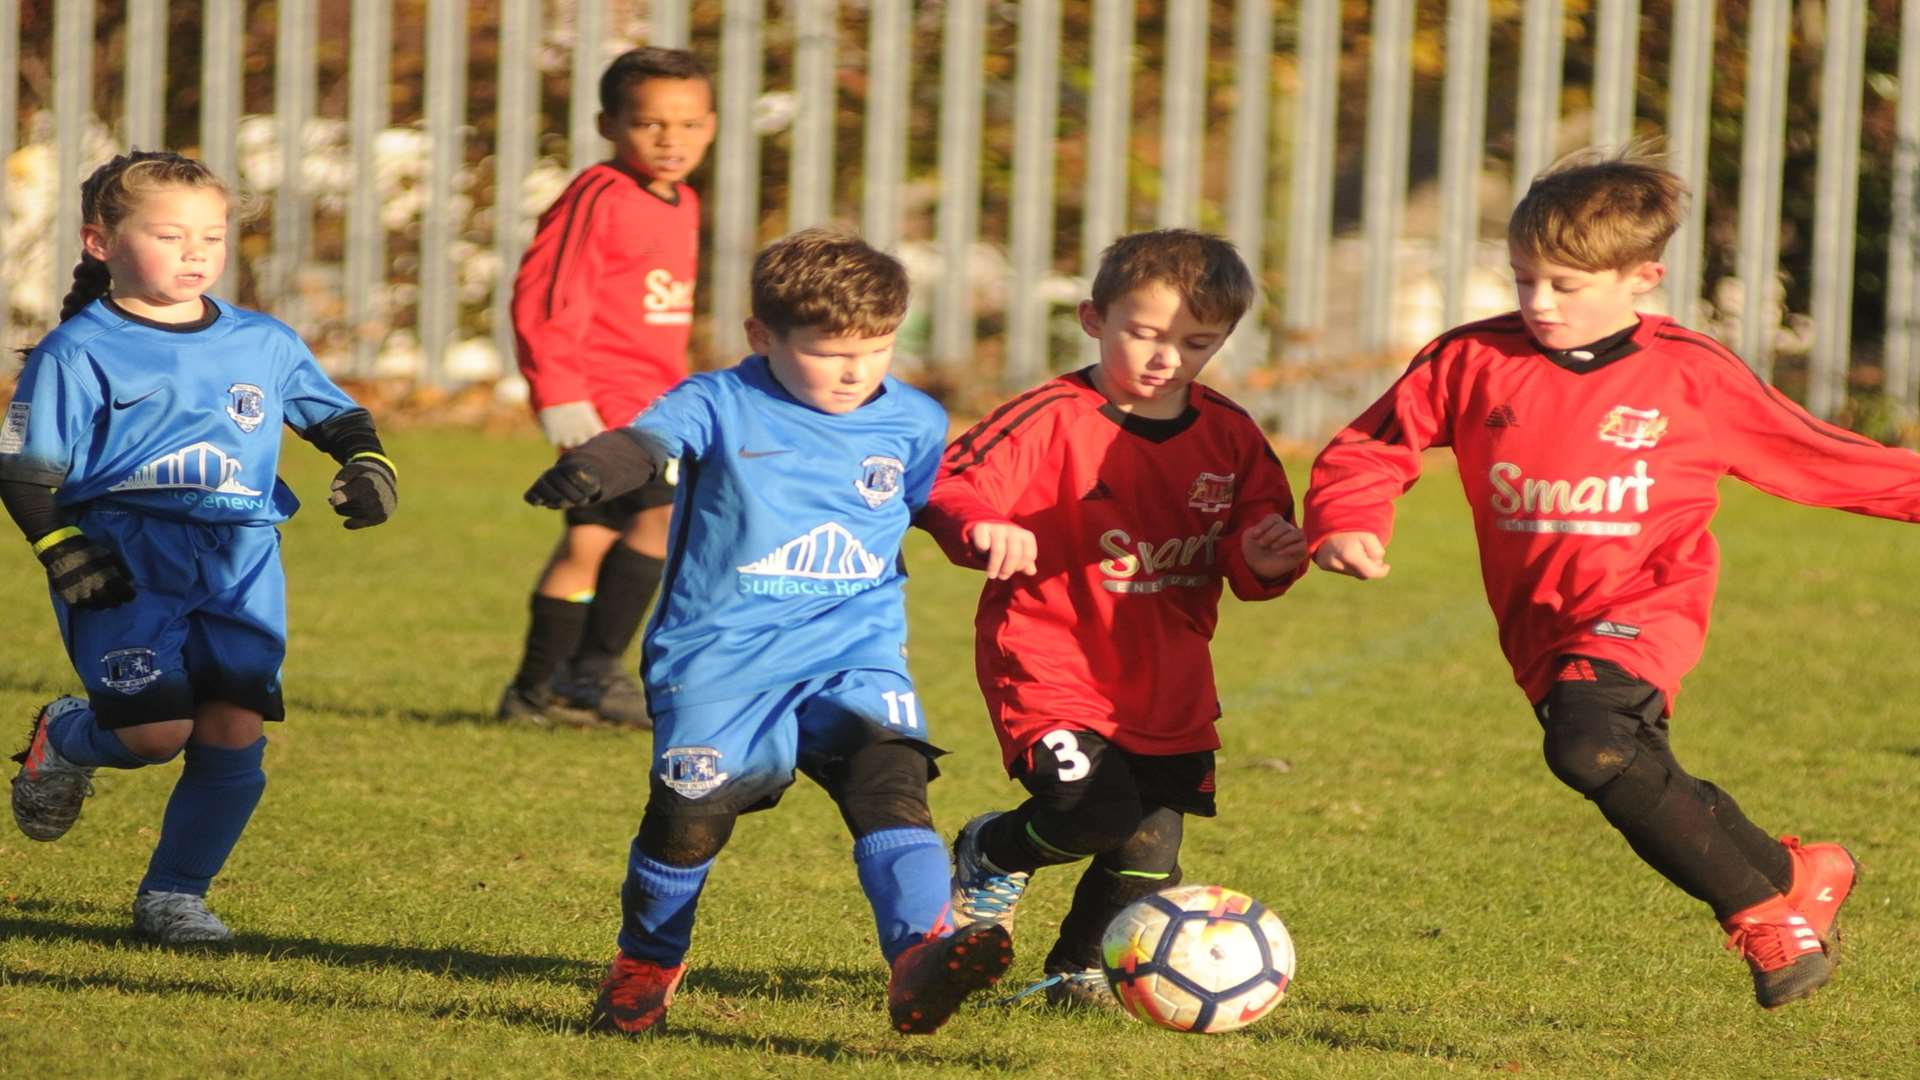 Medway United East under-7s and Woodcoombe Youth under-7s get stuck in Picture: Steve Crispe